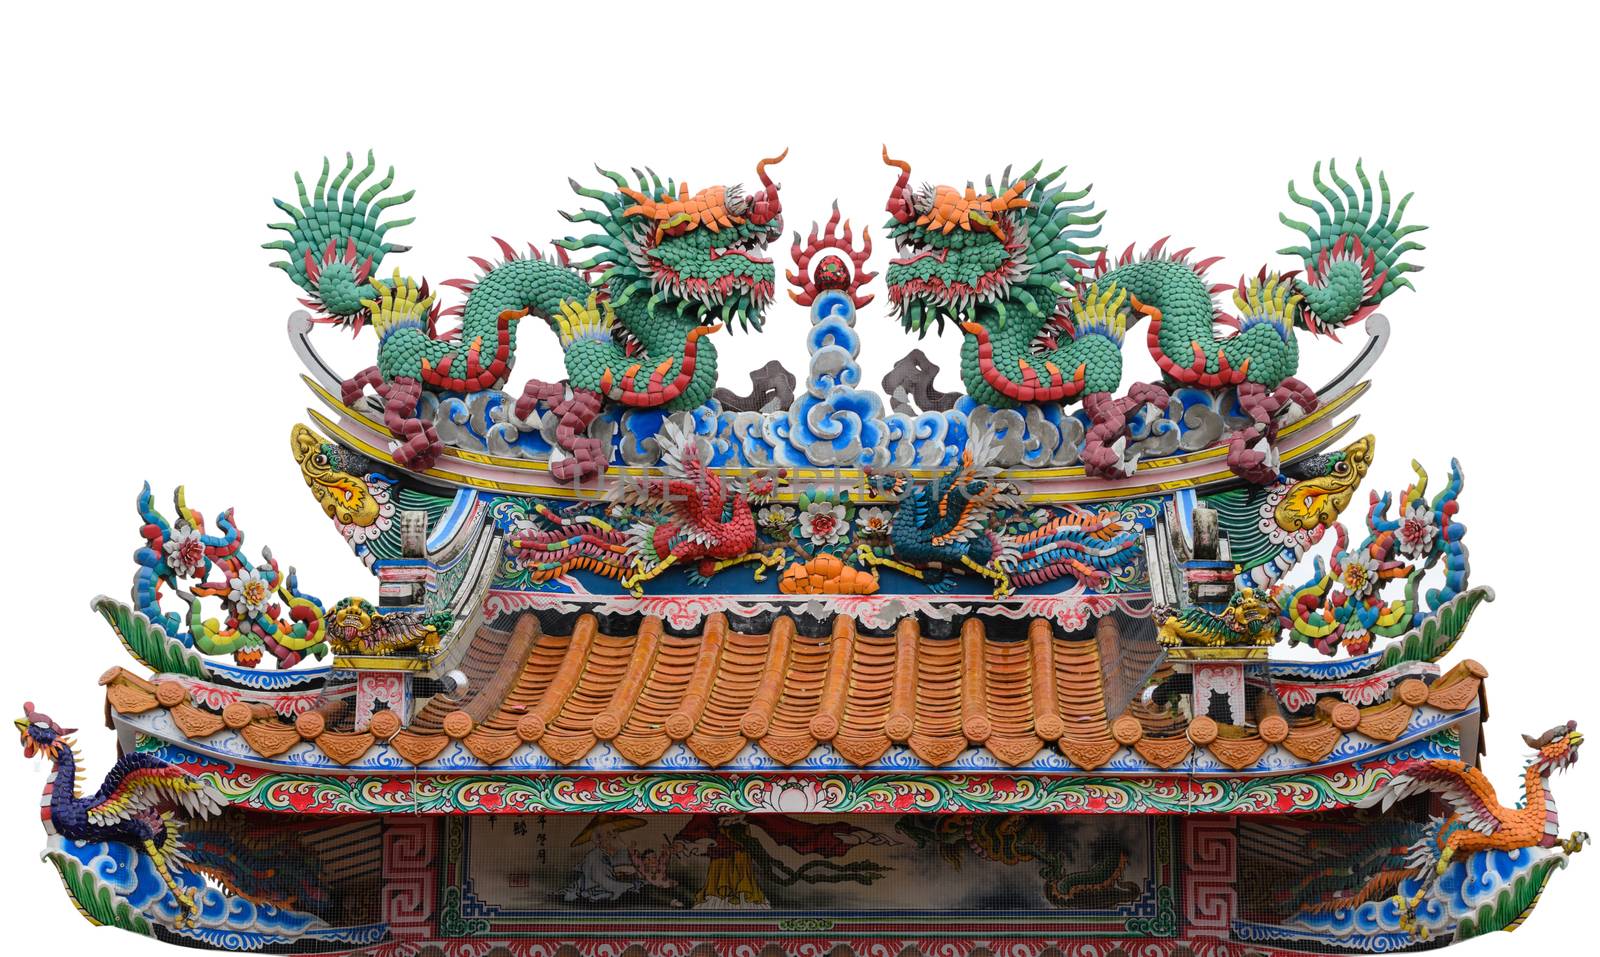 A set of asian traditional sculpture on the rooftop of temple.